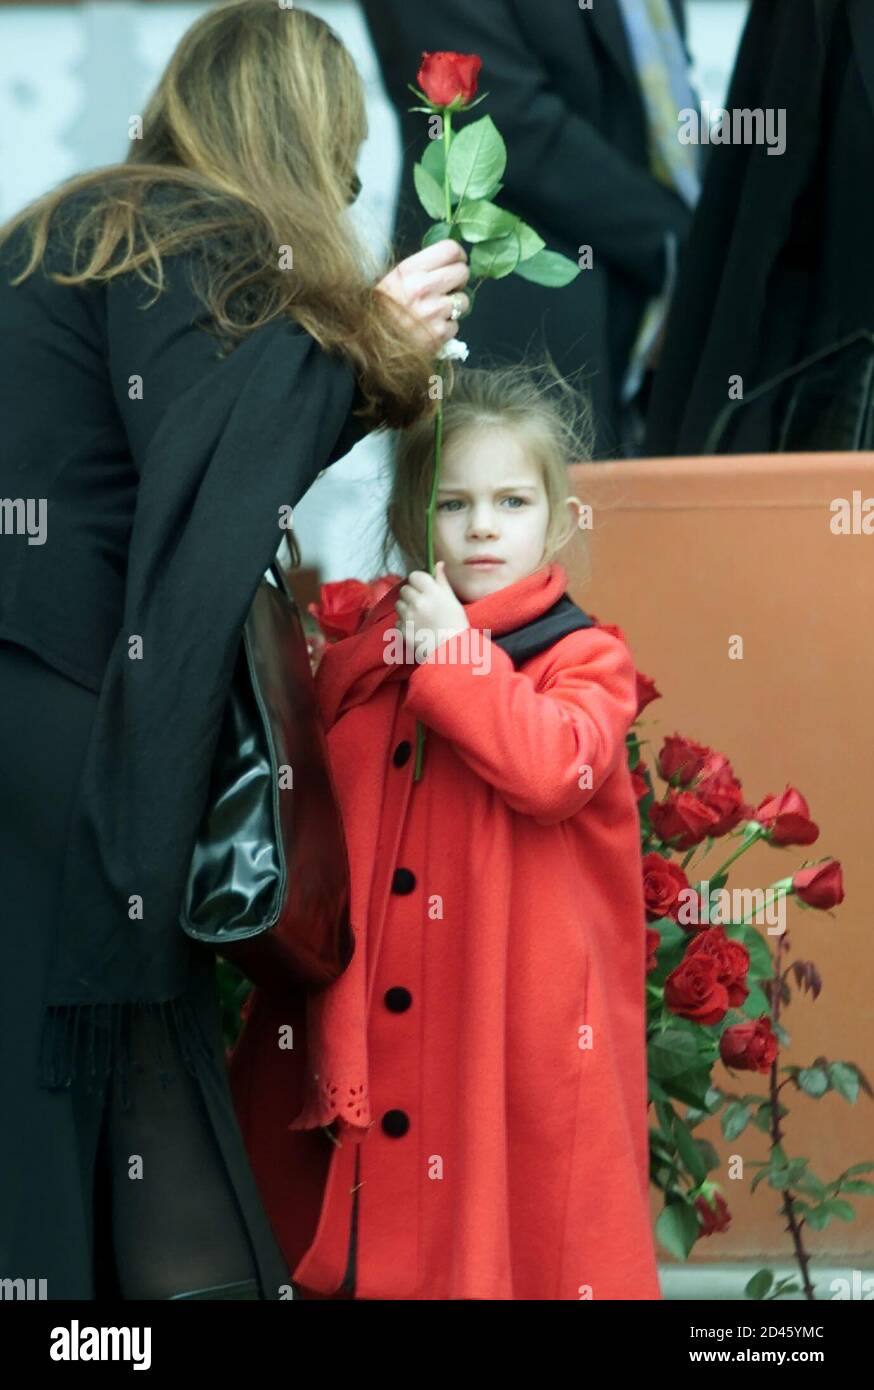 Lara Barnard, 4, youngest child of pioneering heart transplant specialist Dr Christiaan Barnard, holds a flower at her fathers funeral service, September 14, 2001. Dr Barnard, 78, who performed the world's first heart transplant in 1967, died September 2 in Cyprus. His ashes were interred in the garden of the house he was born in in the small farming town of Beaufort West. REUTERS/Mike Hutchings  MH/ Stock Photo